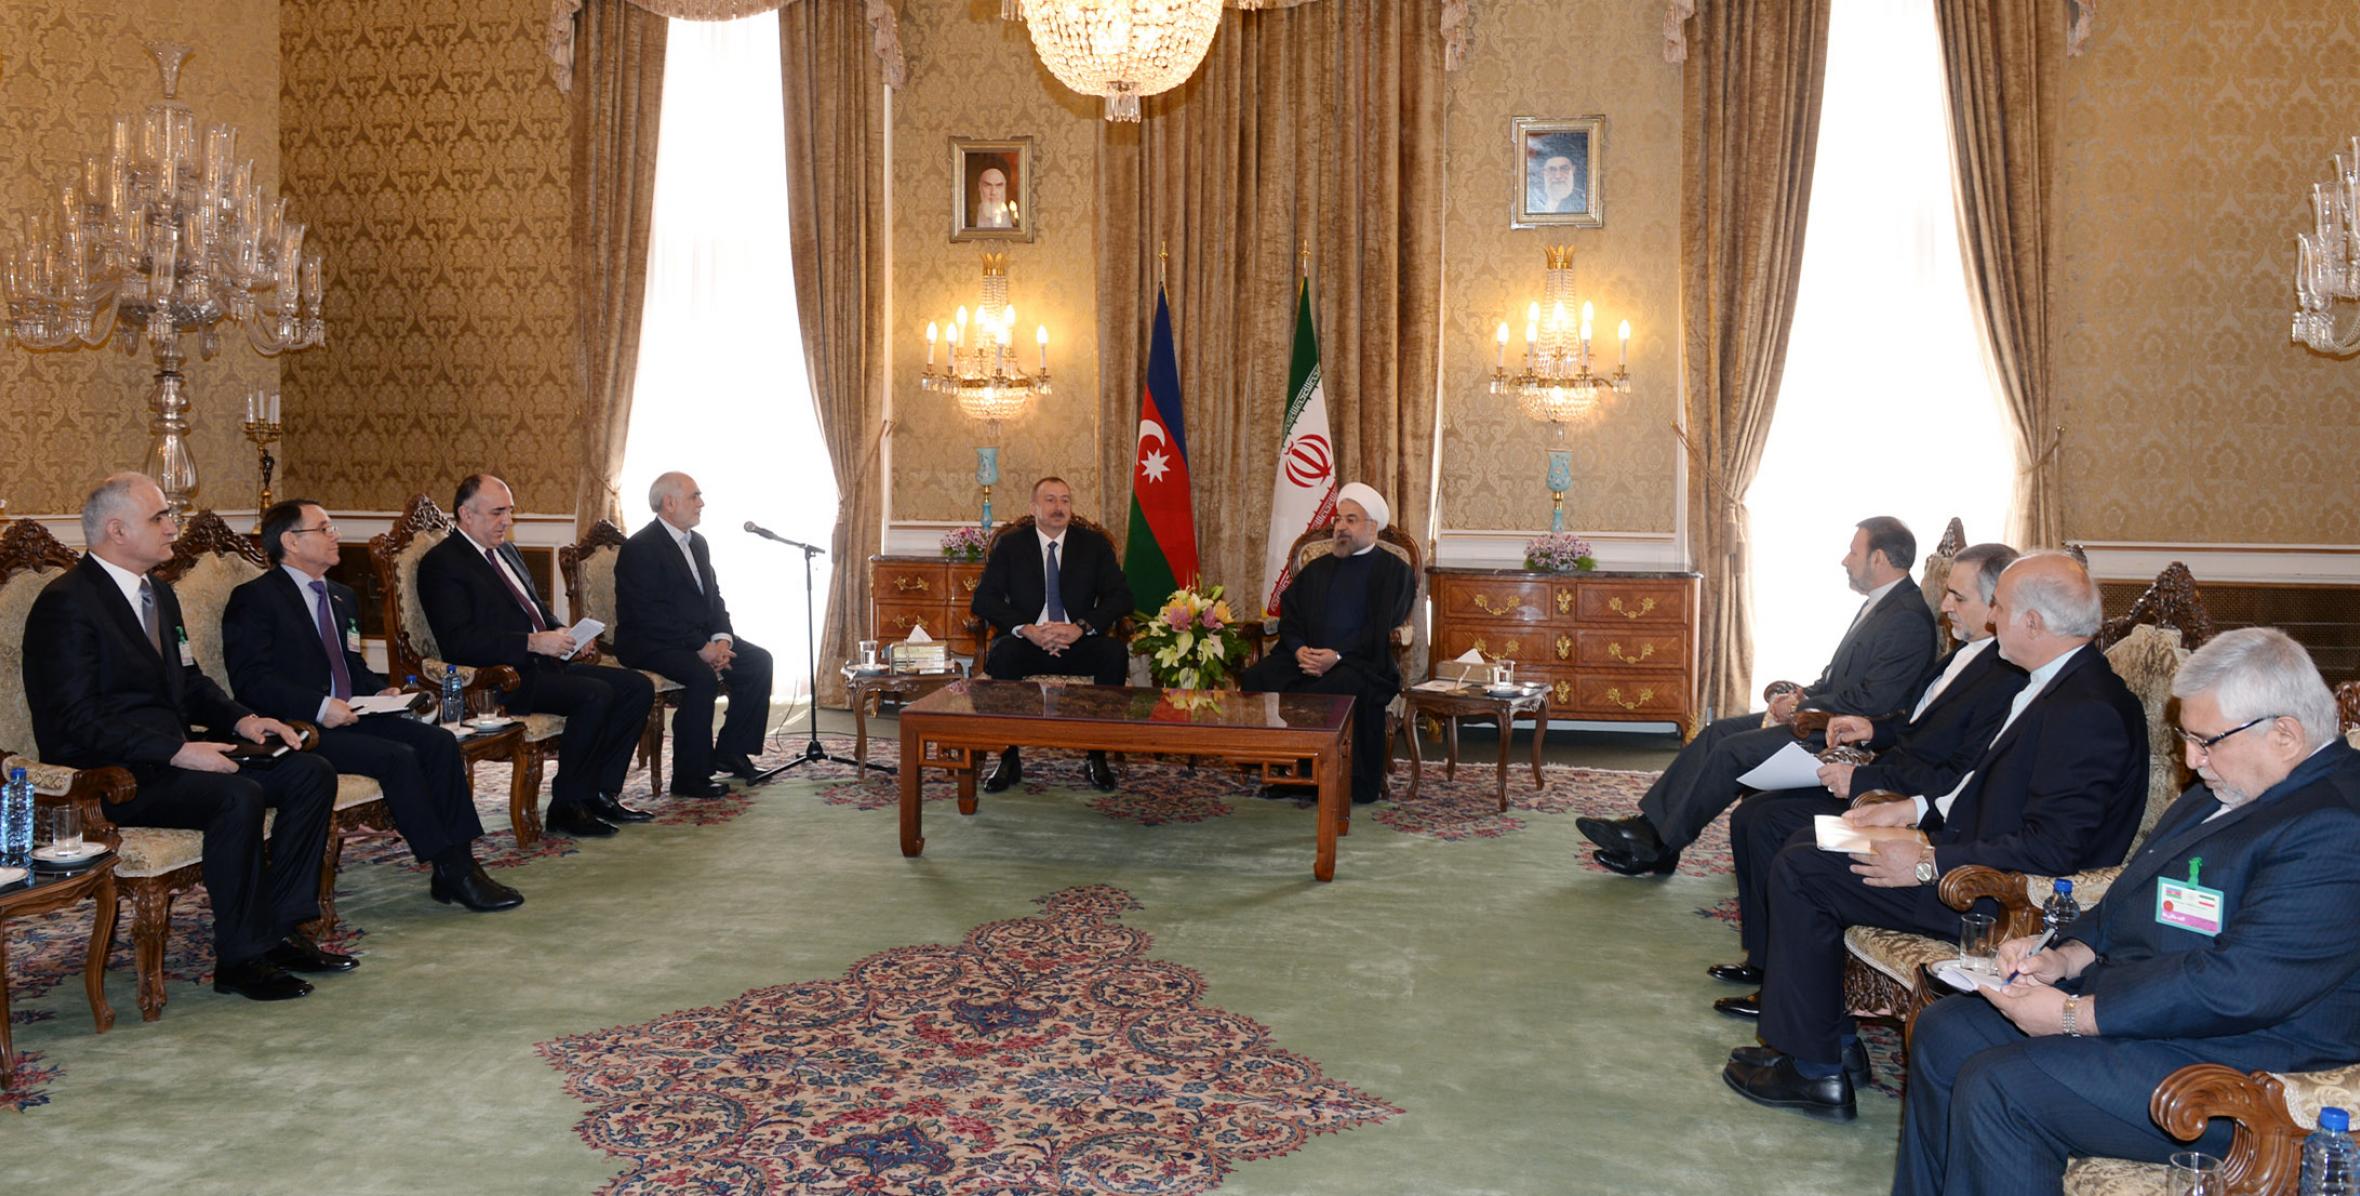 Ilham Aliyev met with President of Iran Hassan Rouhani in an expanded format